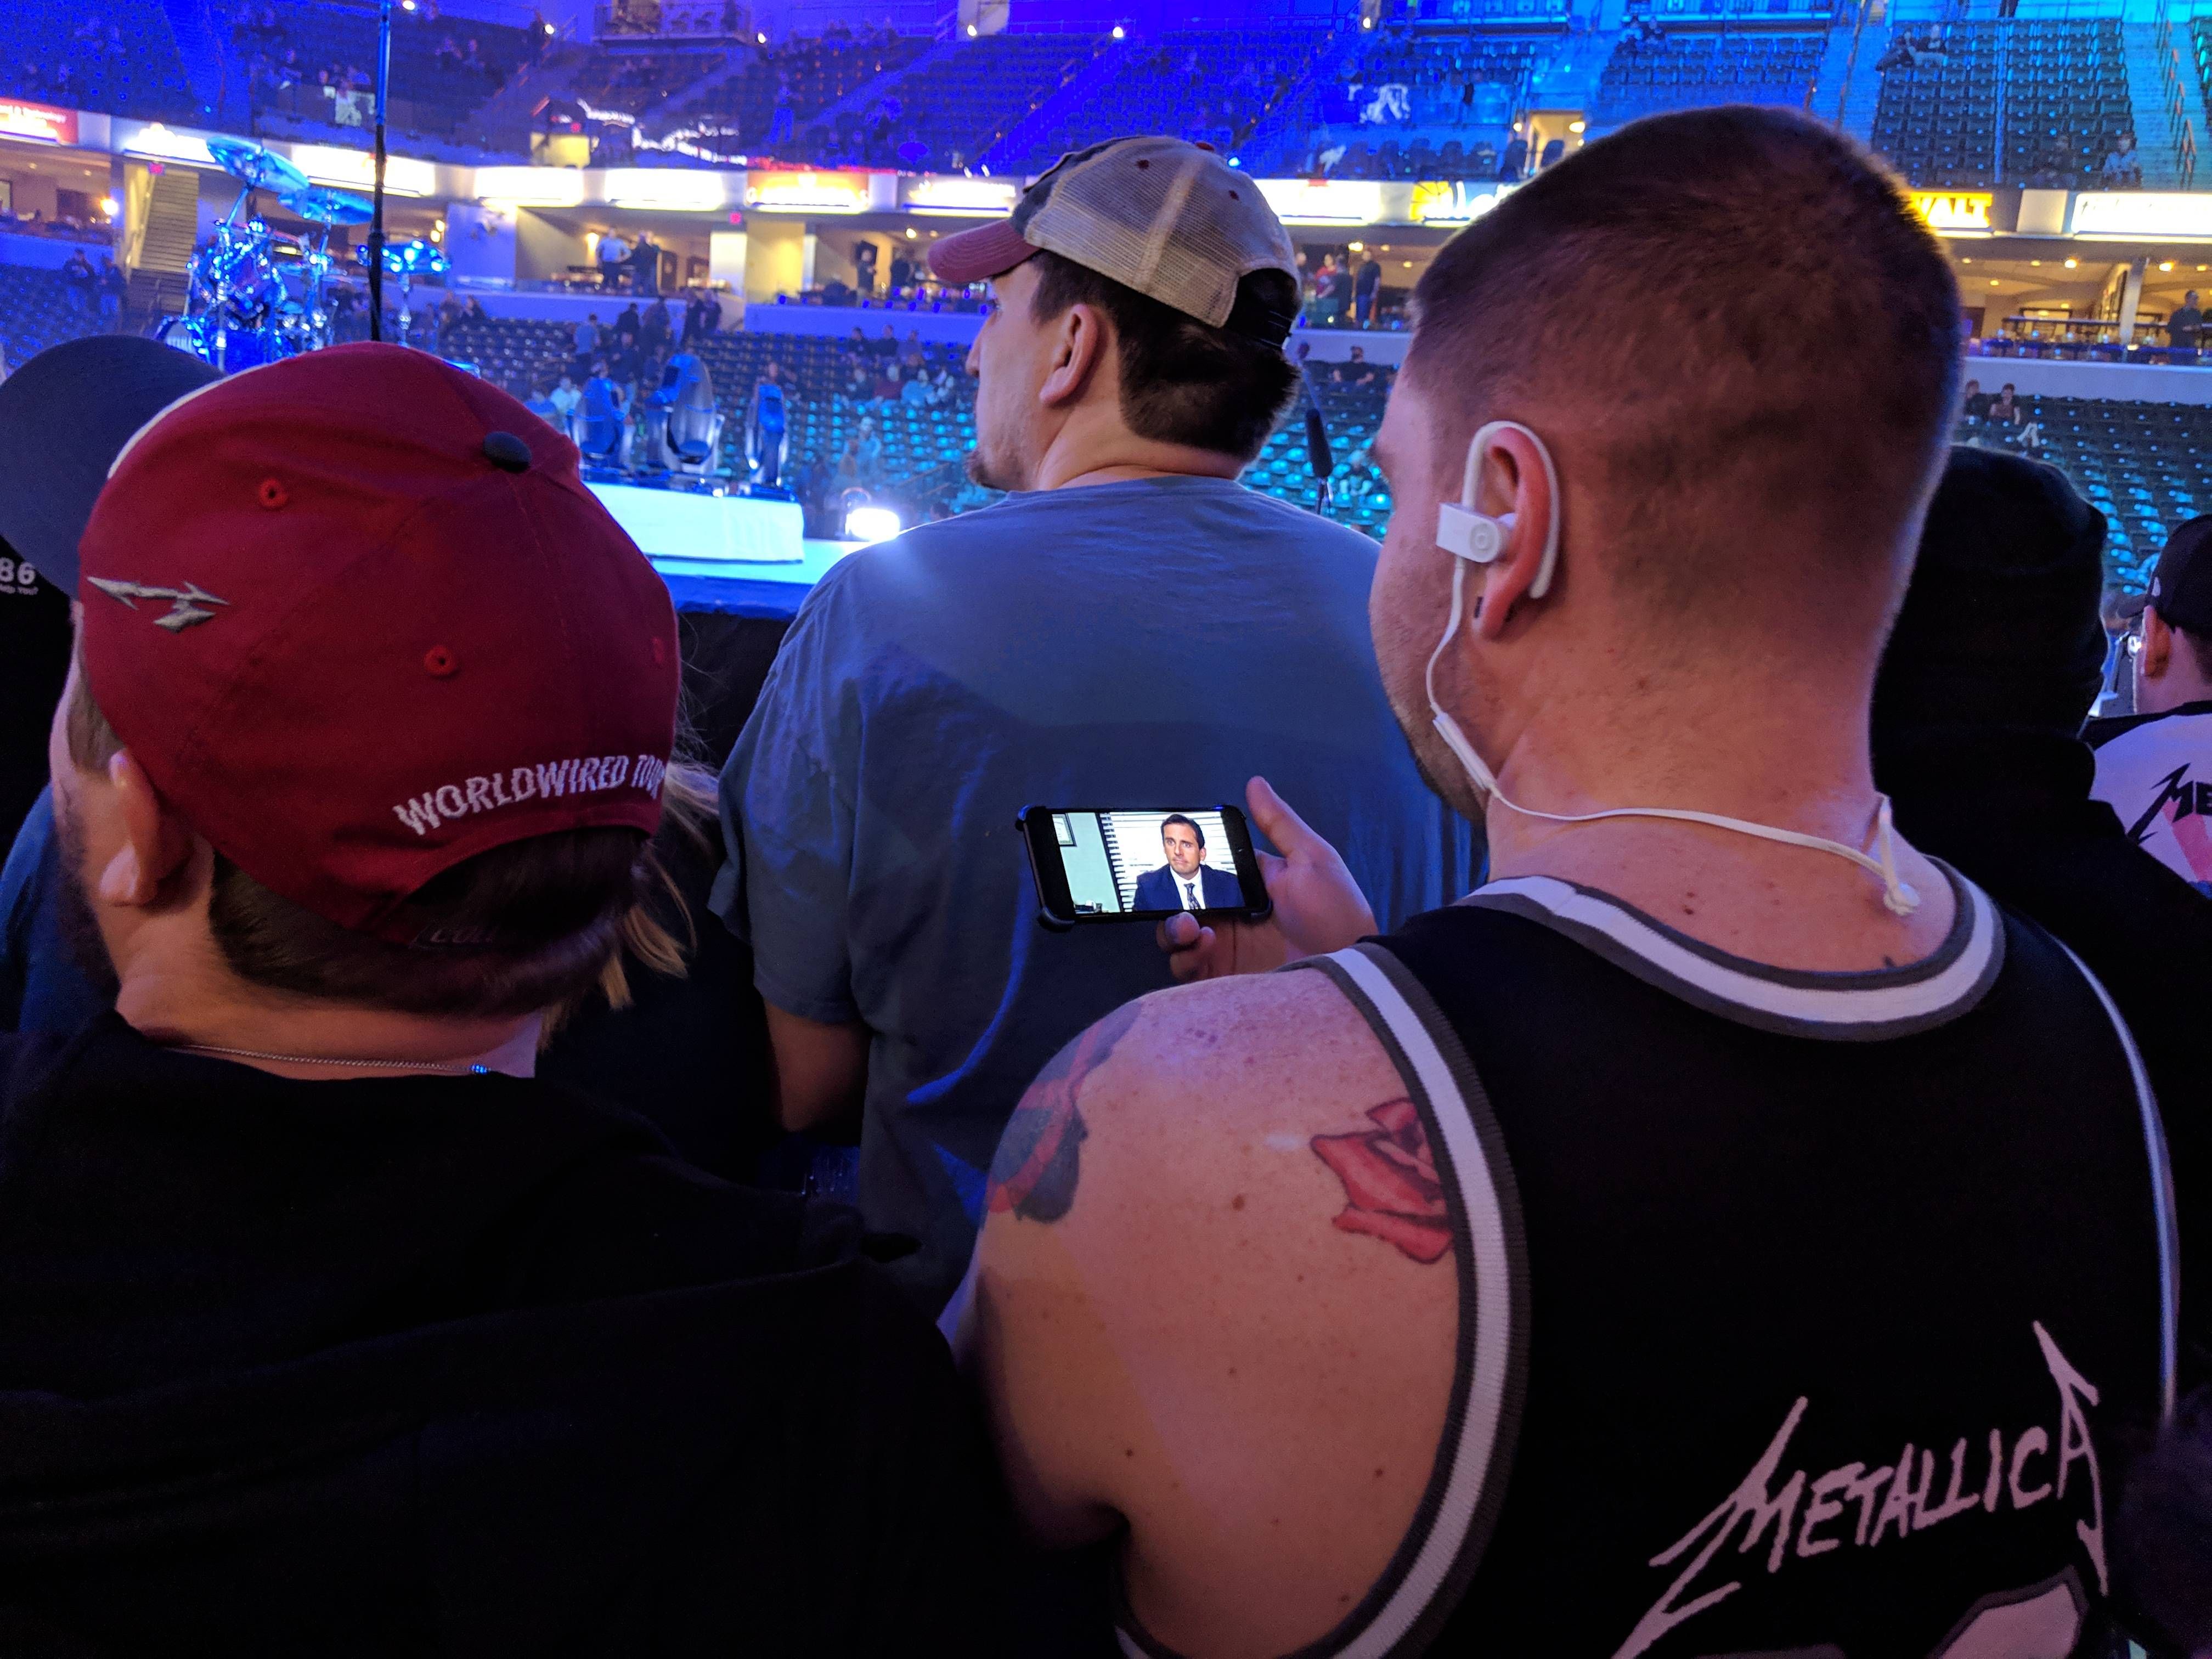 At a Metallica concert and this dude is watching The Office